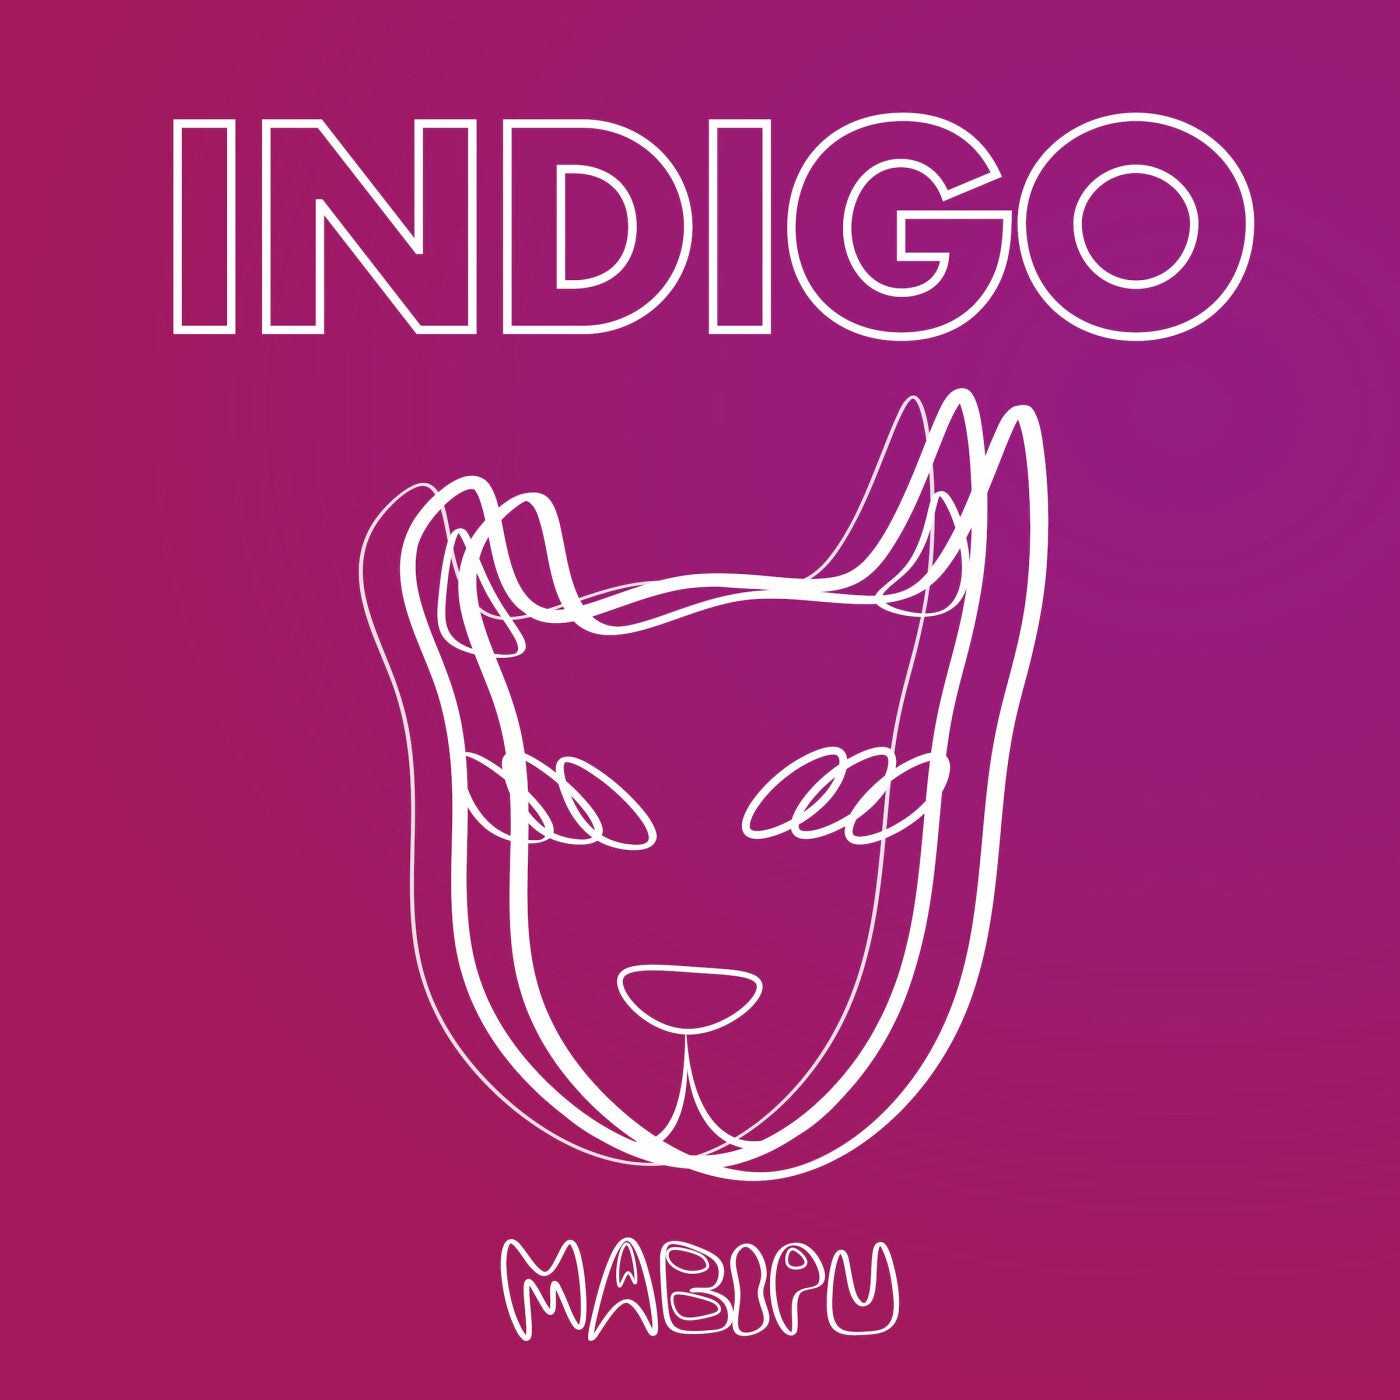 Indigo Paints Ltd commences commercial production at Pudukottai facility in  Tamil Nadu | EquityBulls